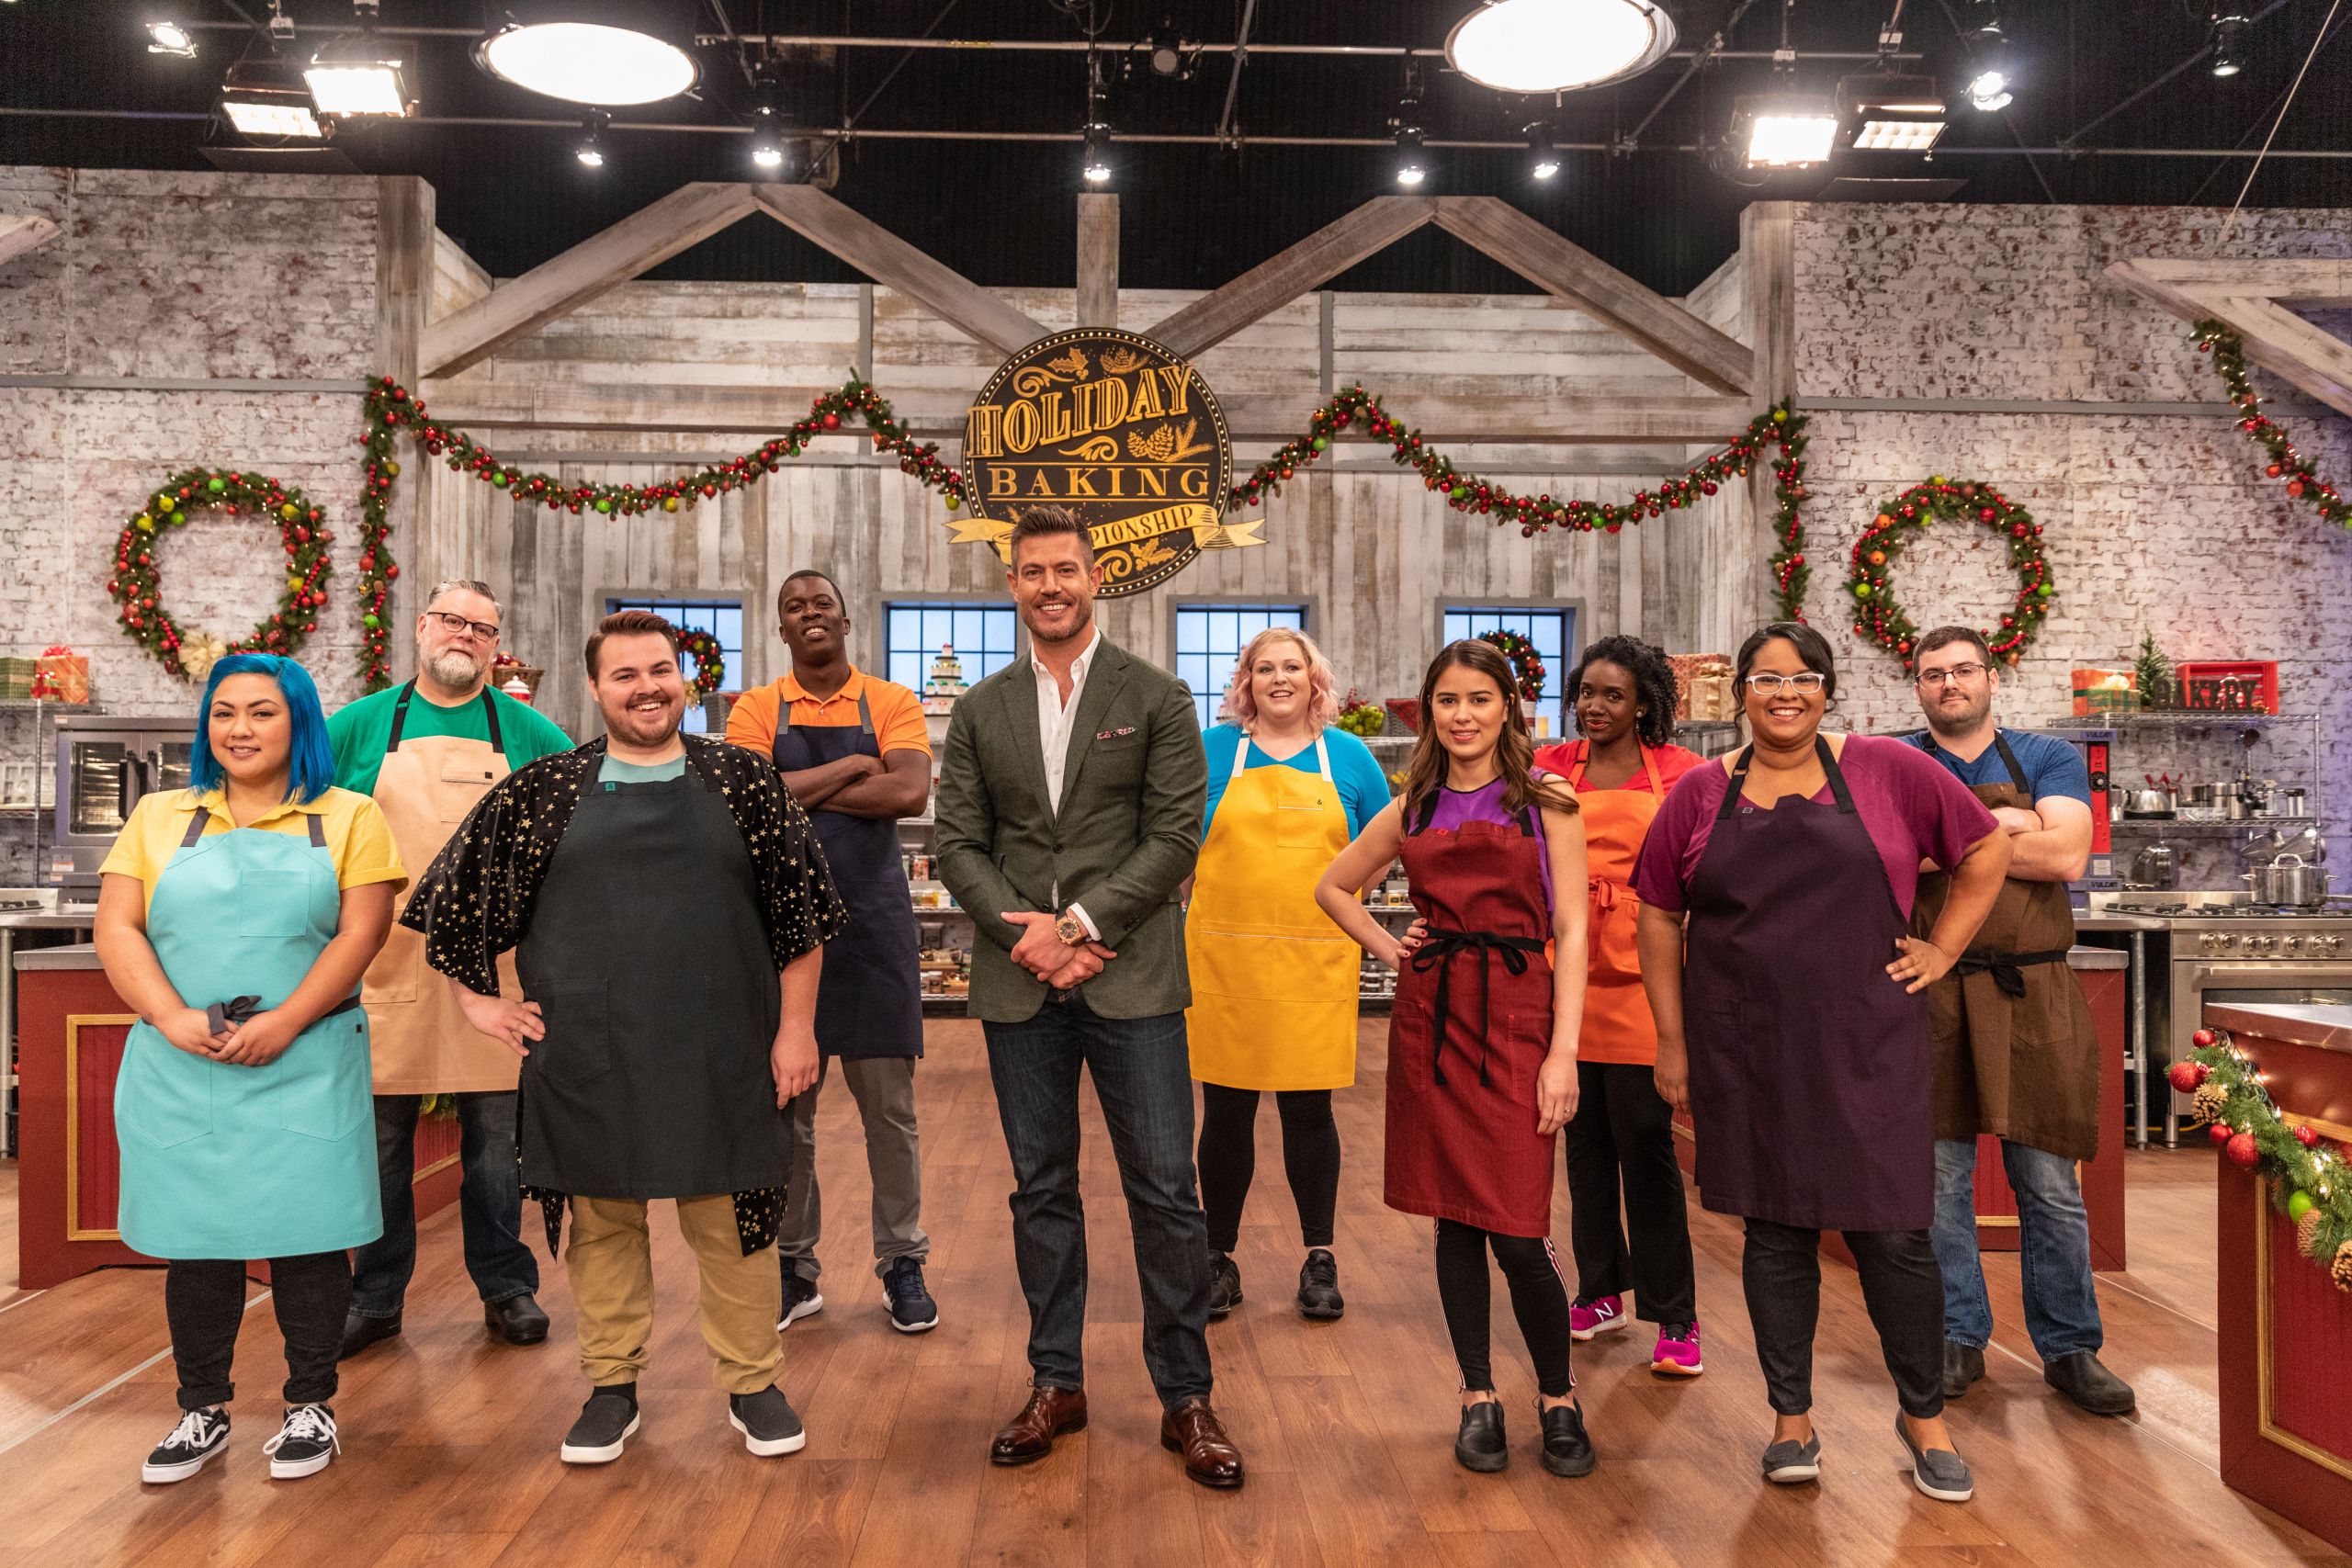 Christmas Baking Championship Unique Holiday Baking Championship Discovery Benelux